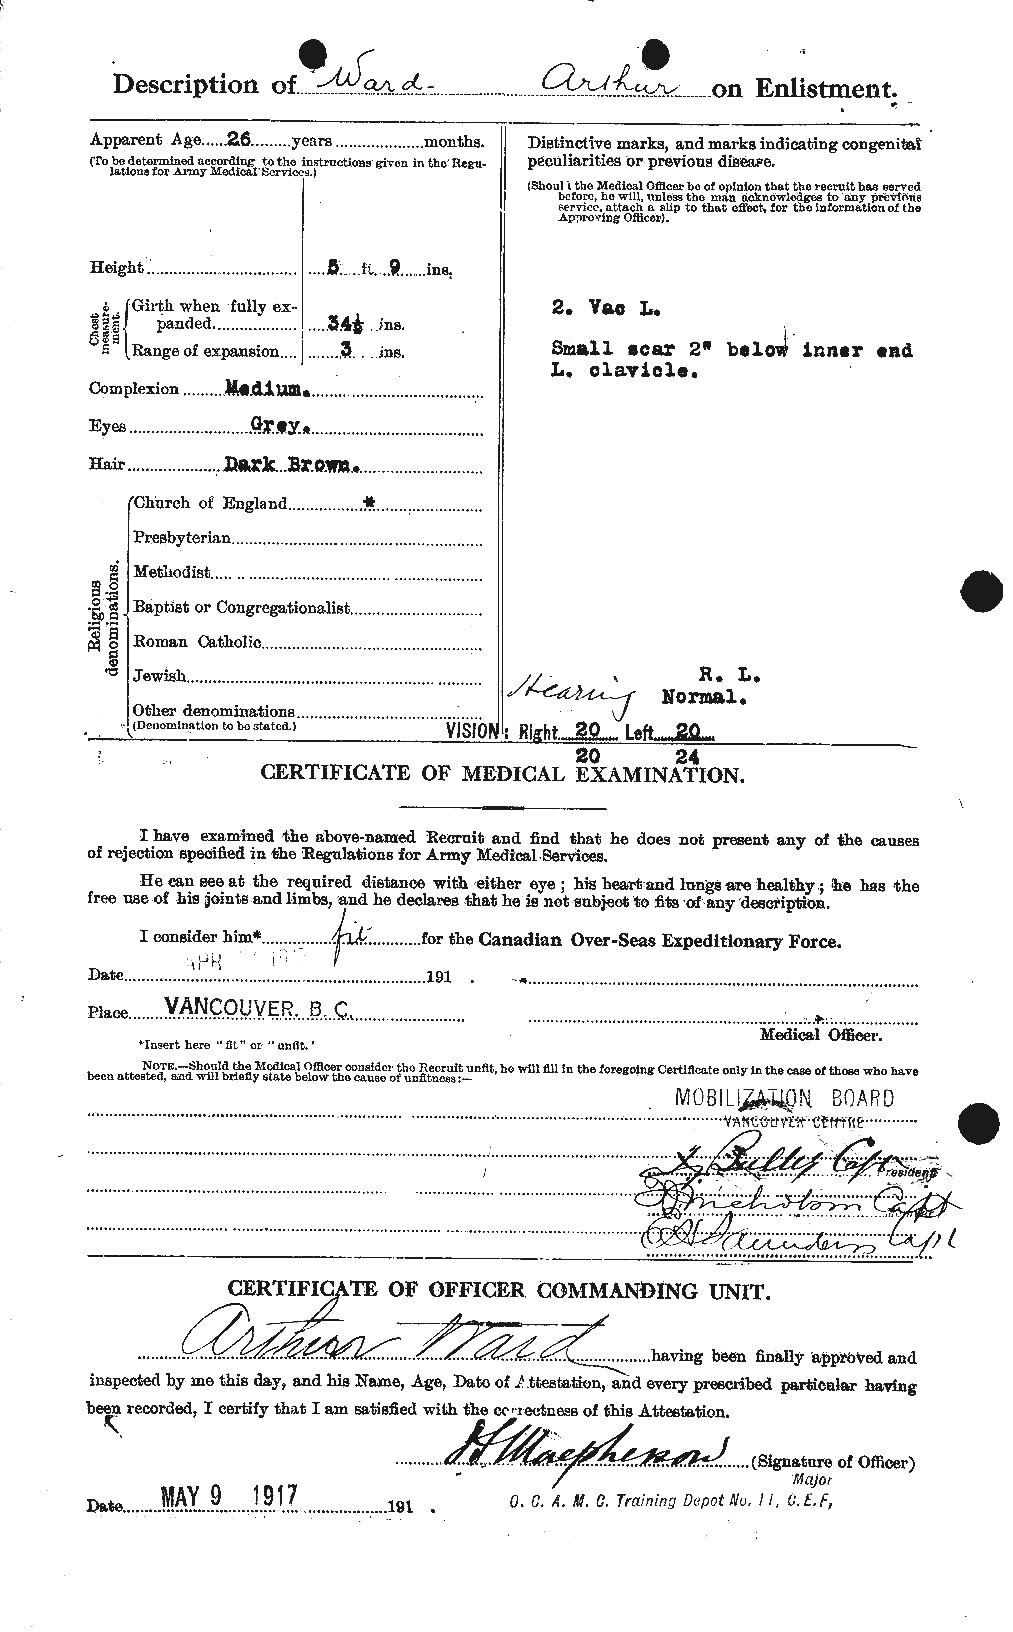 Personnel Records of the First World War - CEF 655146b